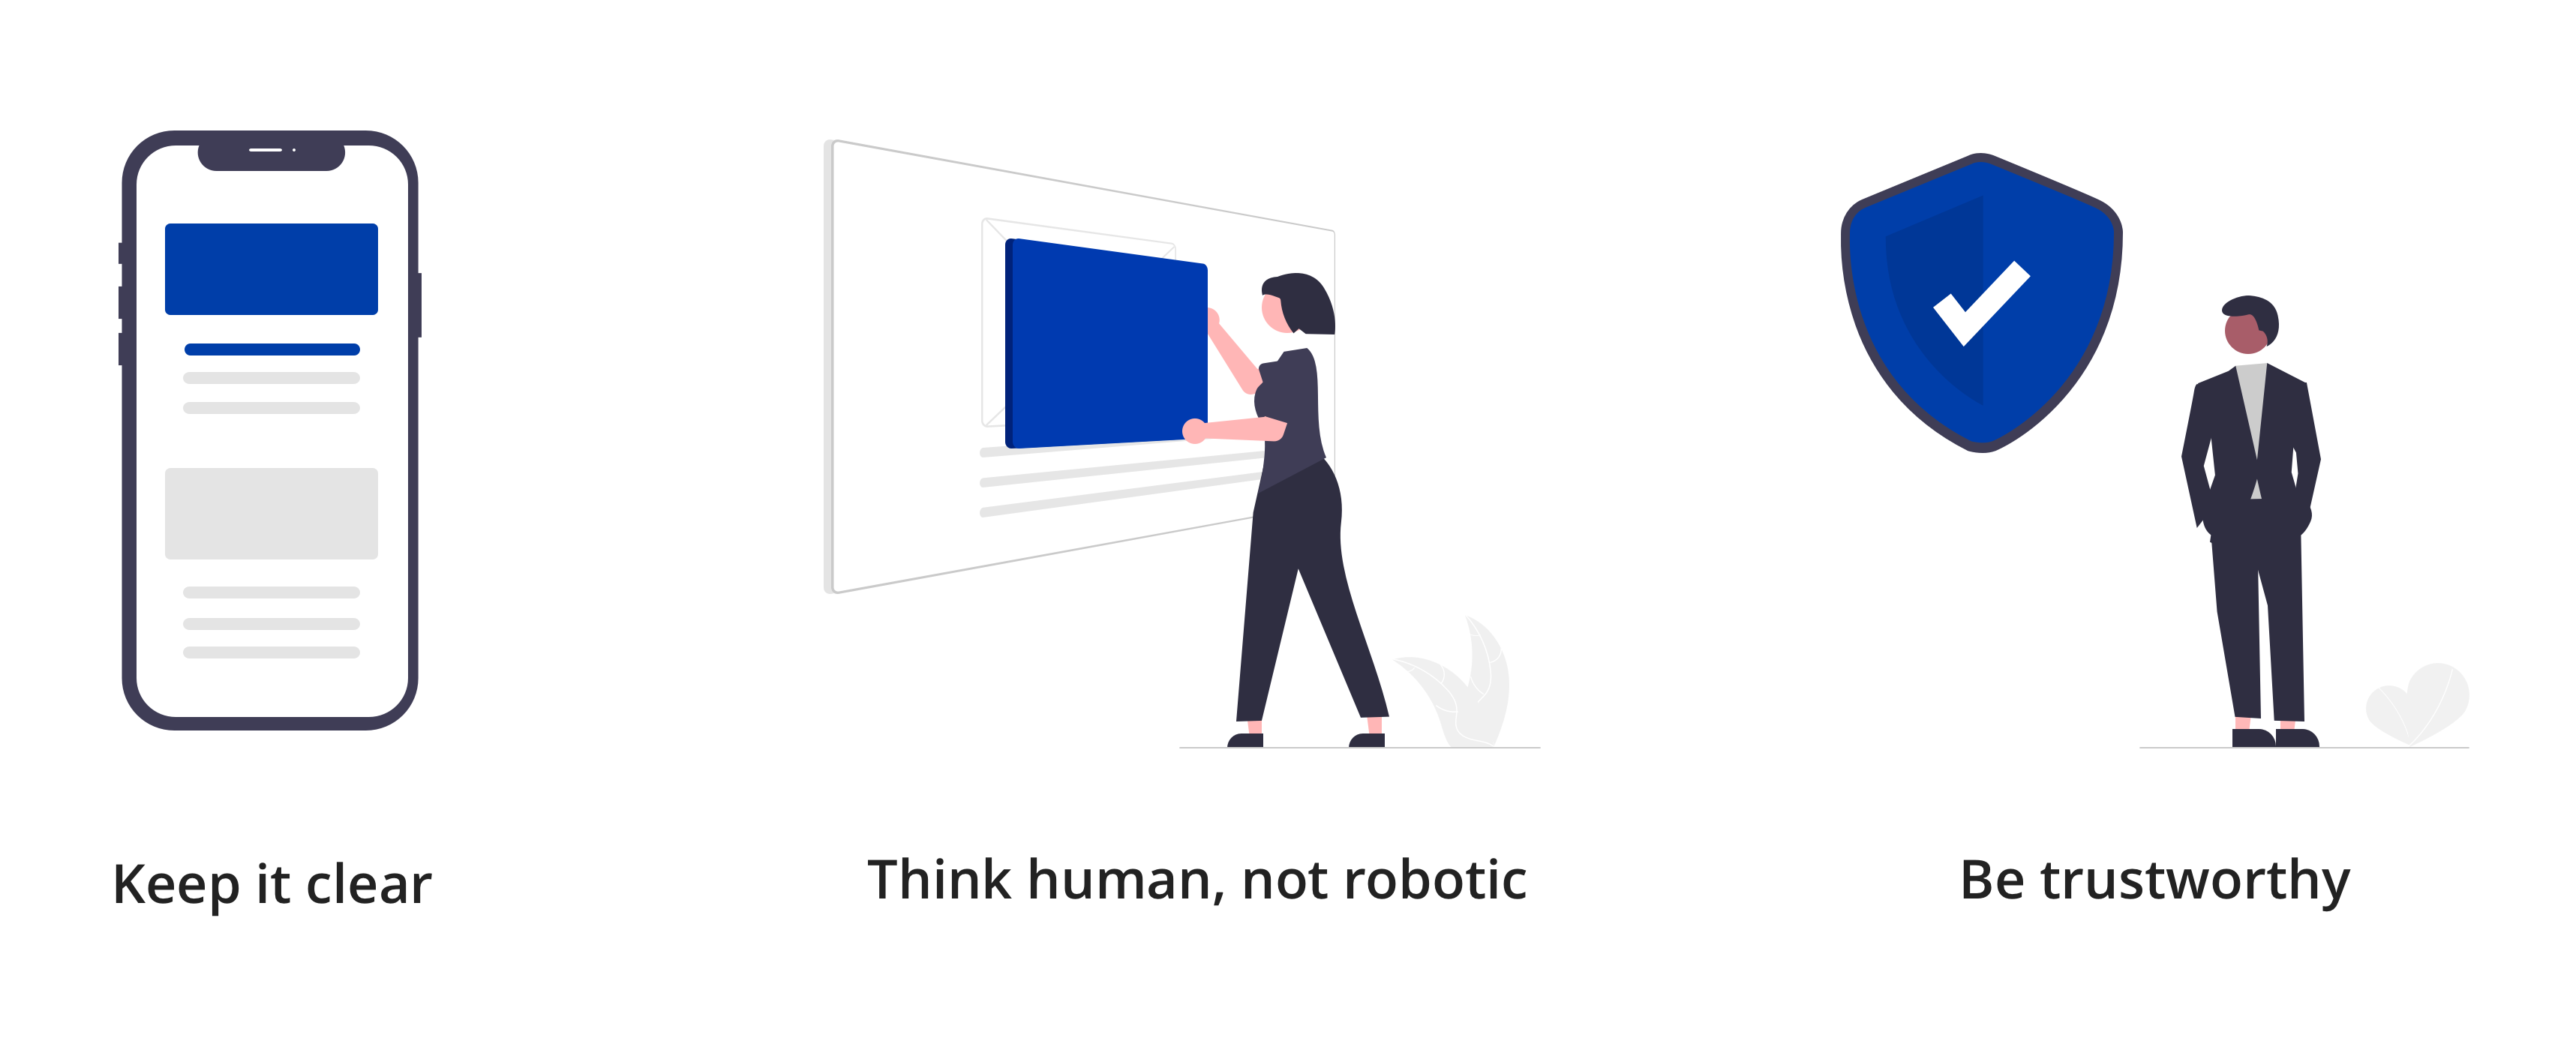 3 UX principles: Keep it clear; Think human, not robotic; Be trustworthy